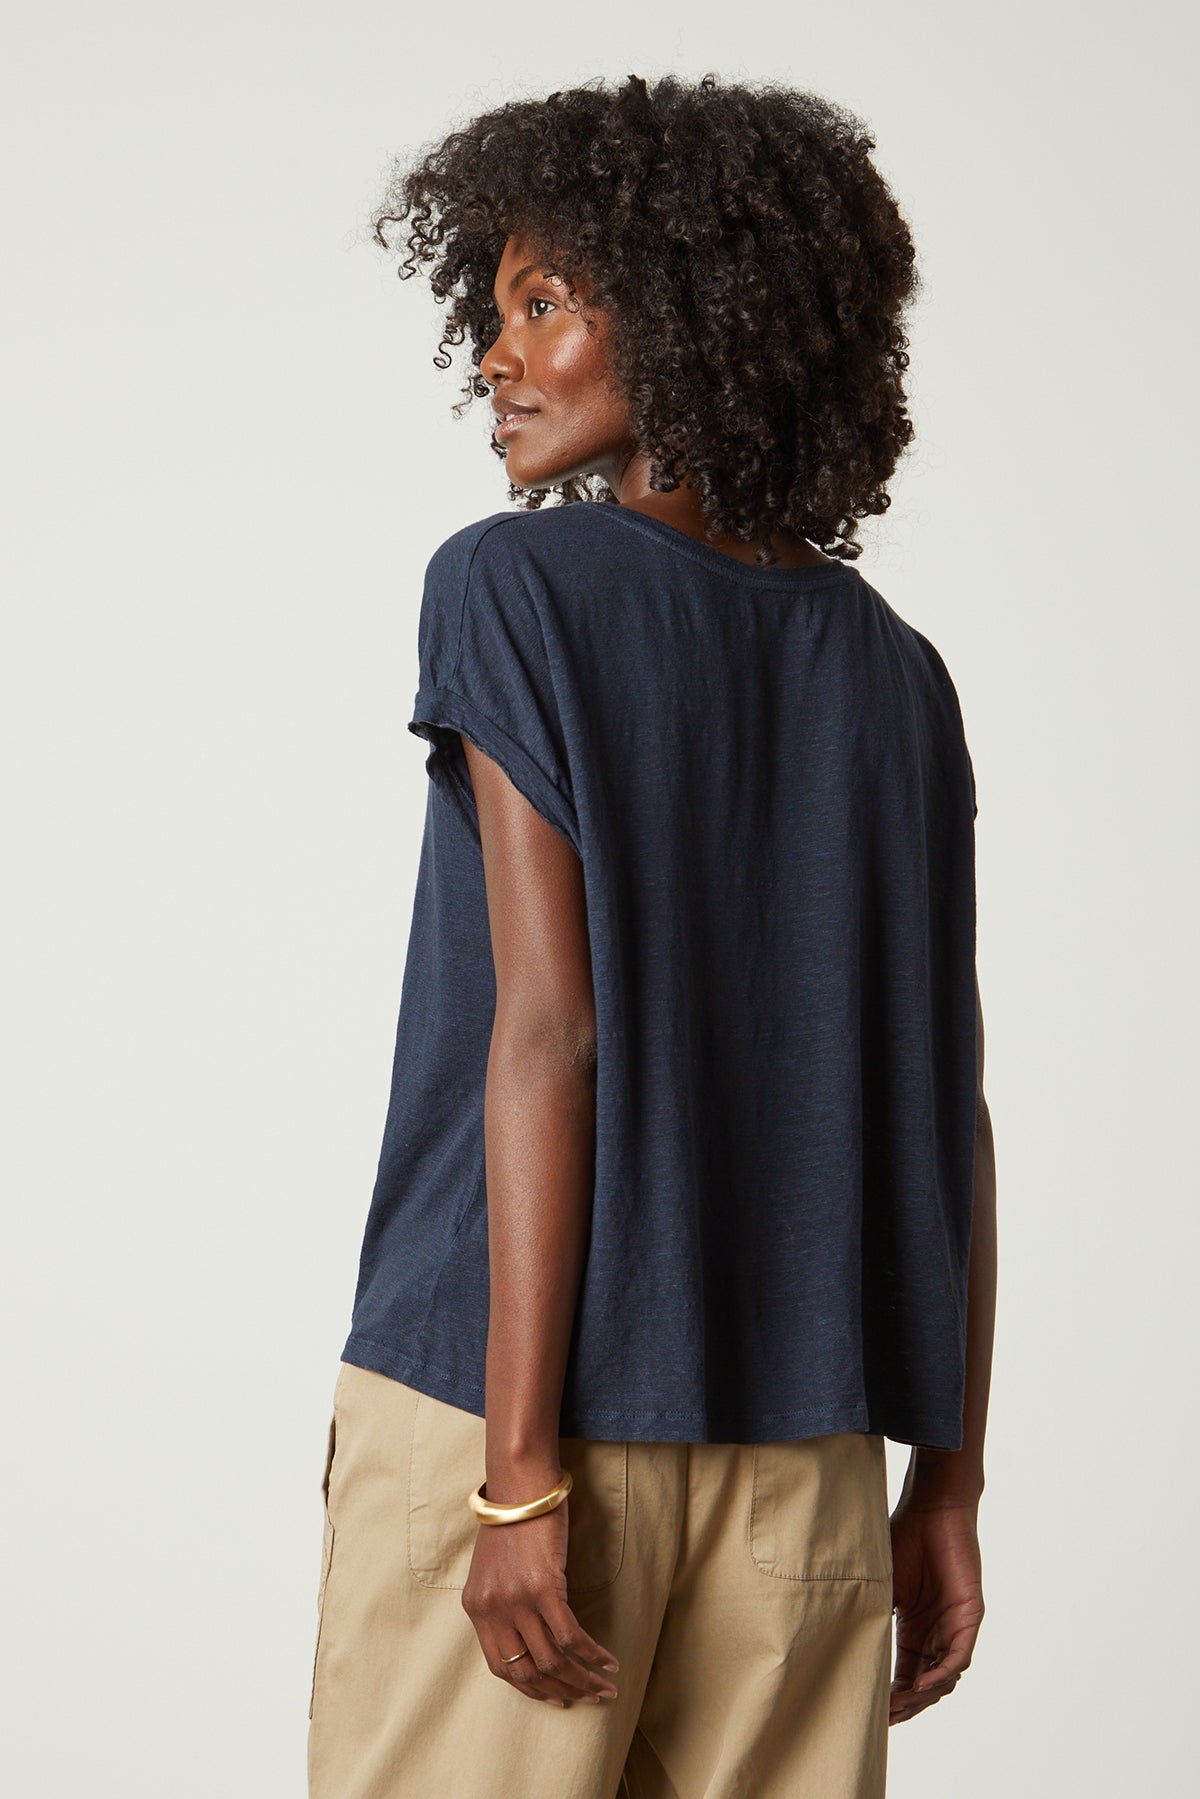   Hudson tee in baltic blue with Misty pant in oak back 